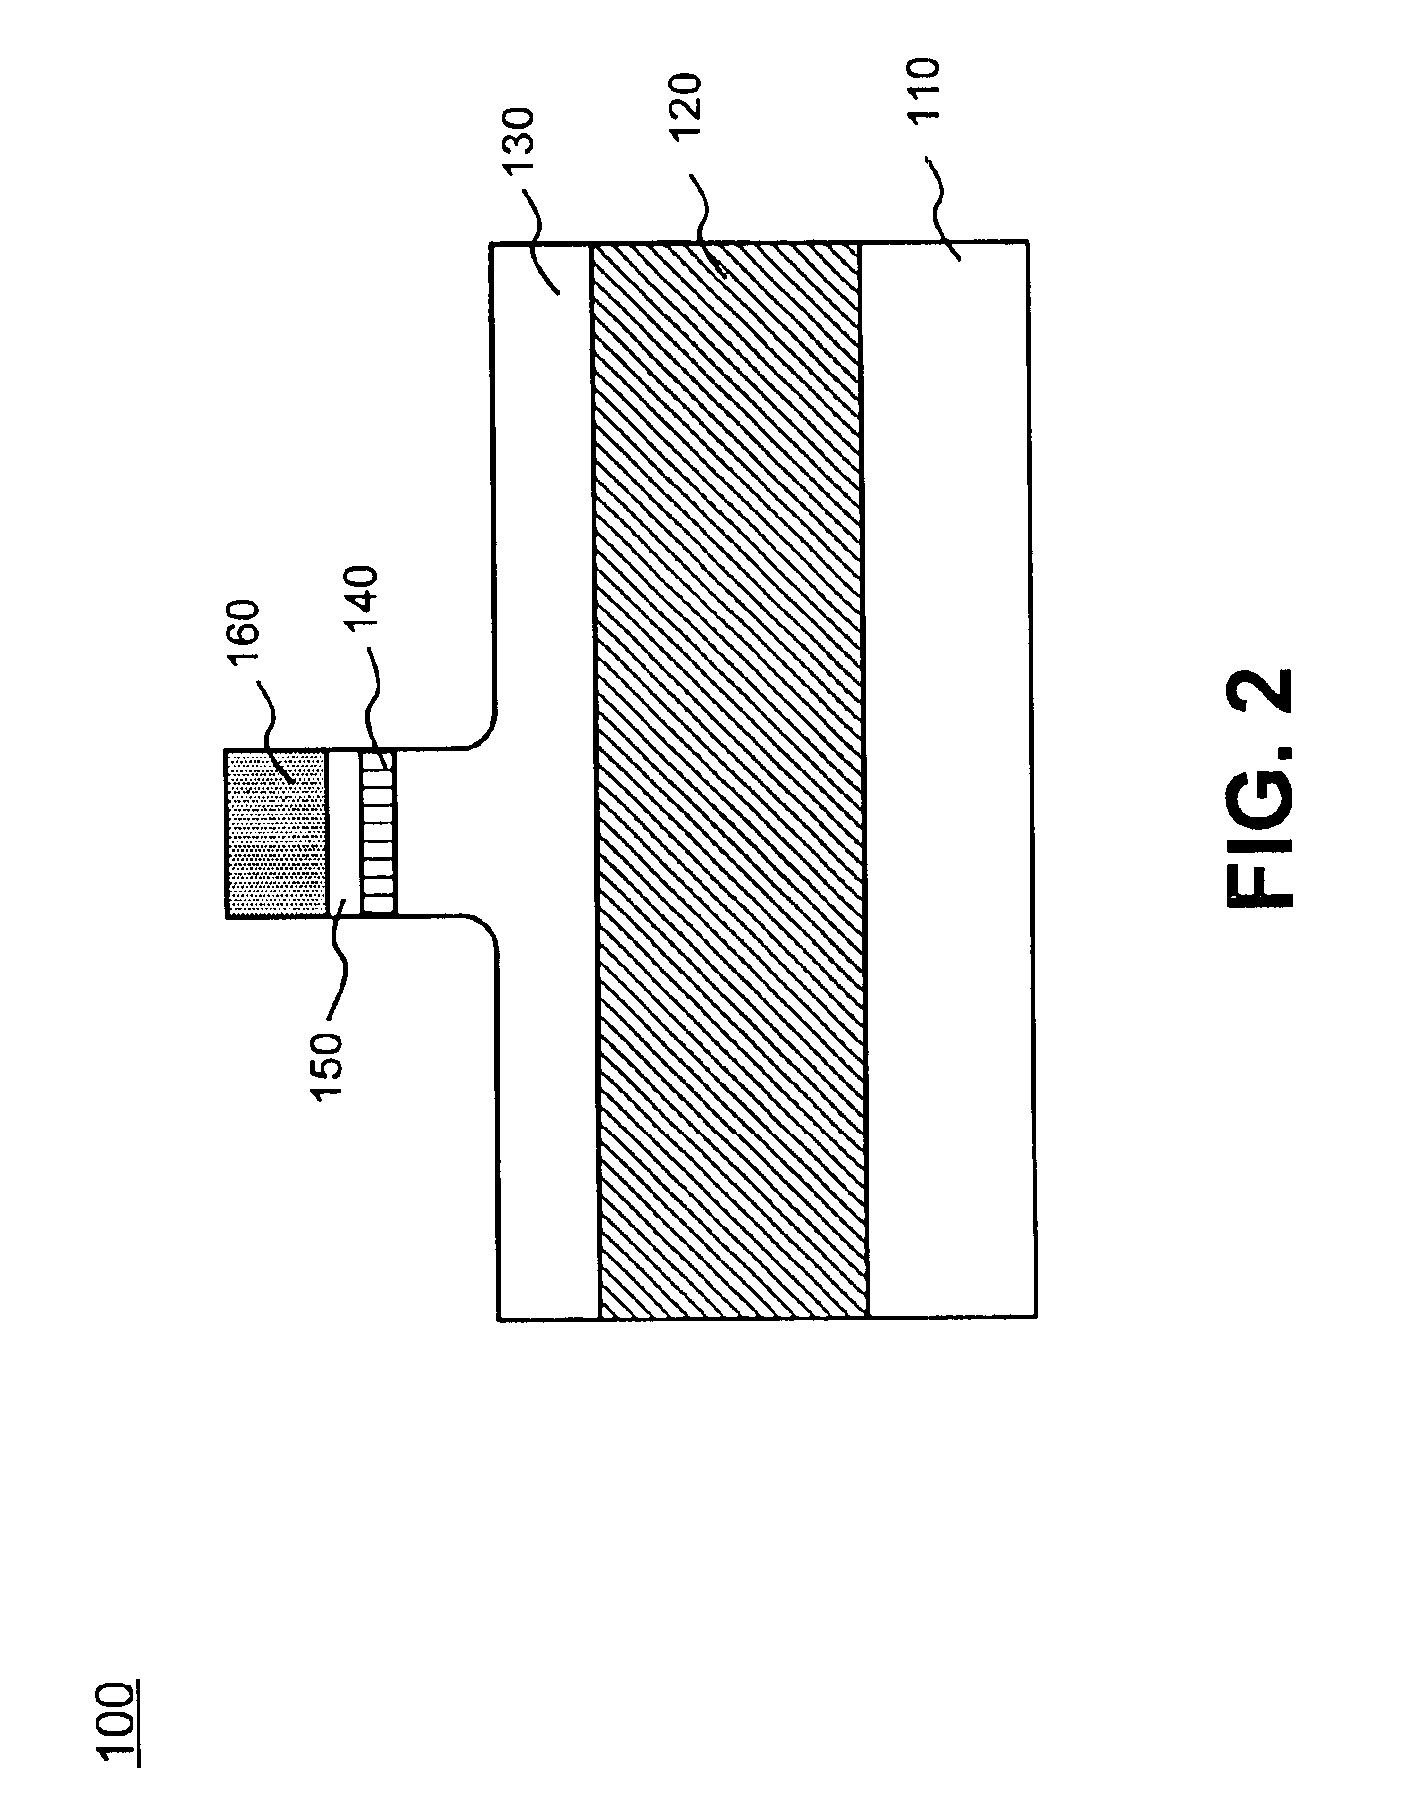 Semiconductor device having a gate structure surrounding a fin